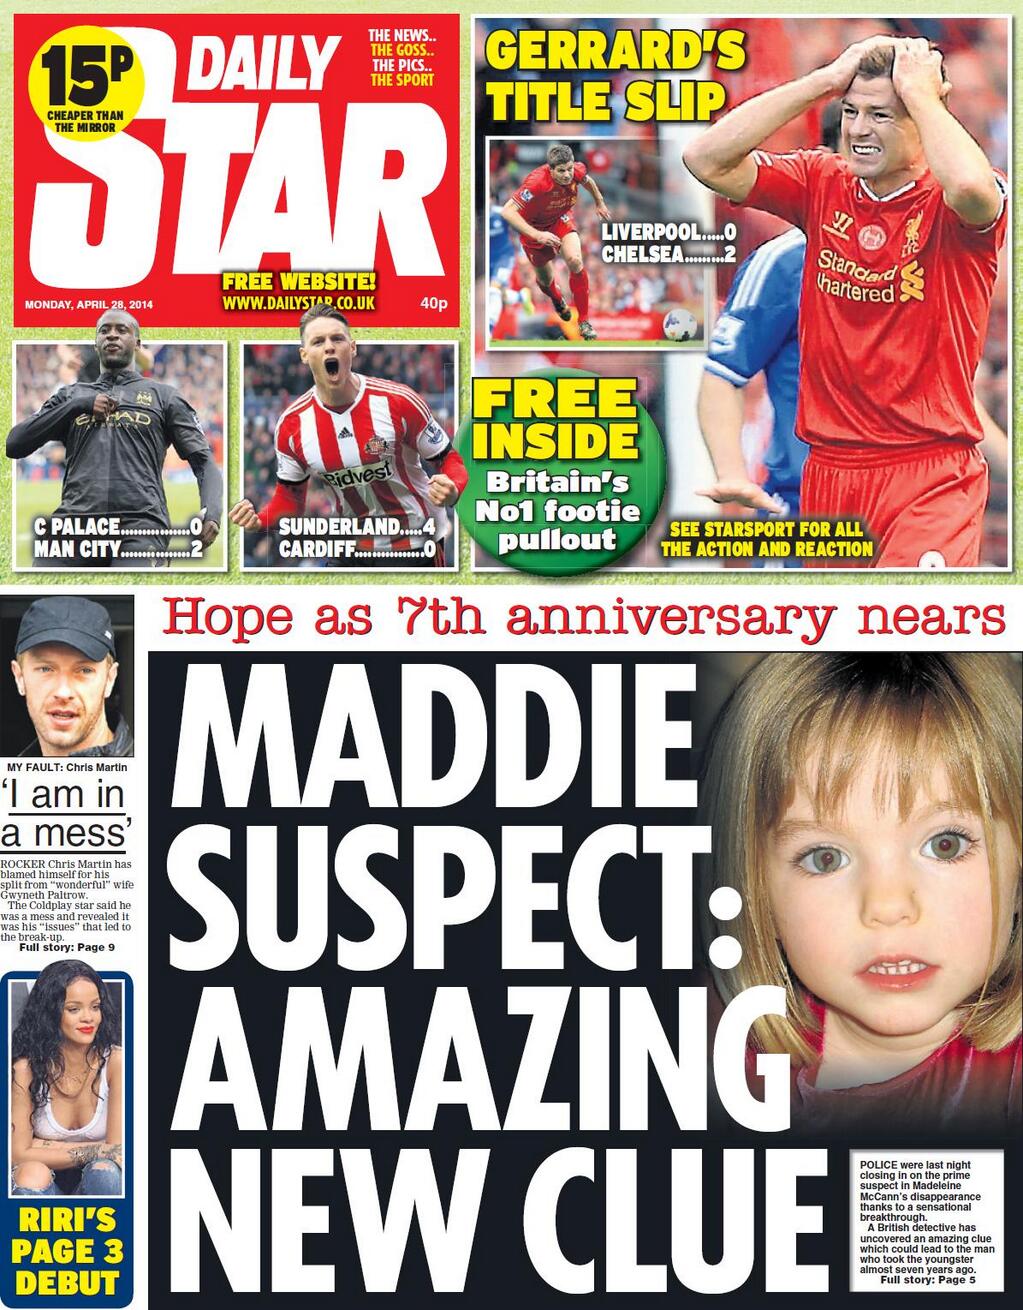 Daily Star, 28 April 2014